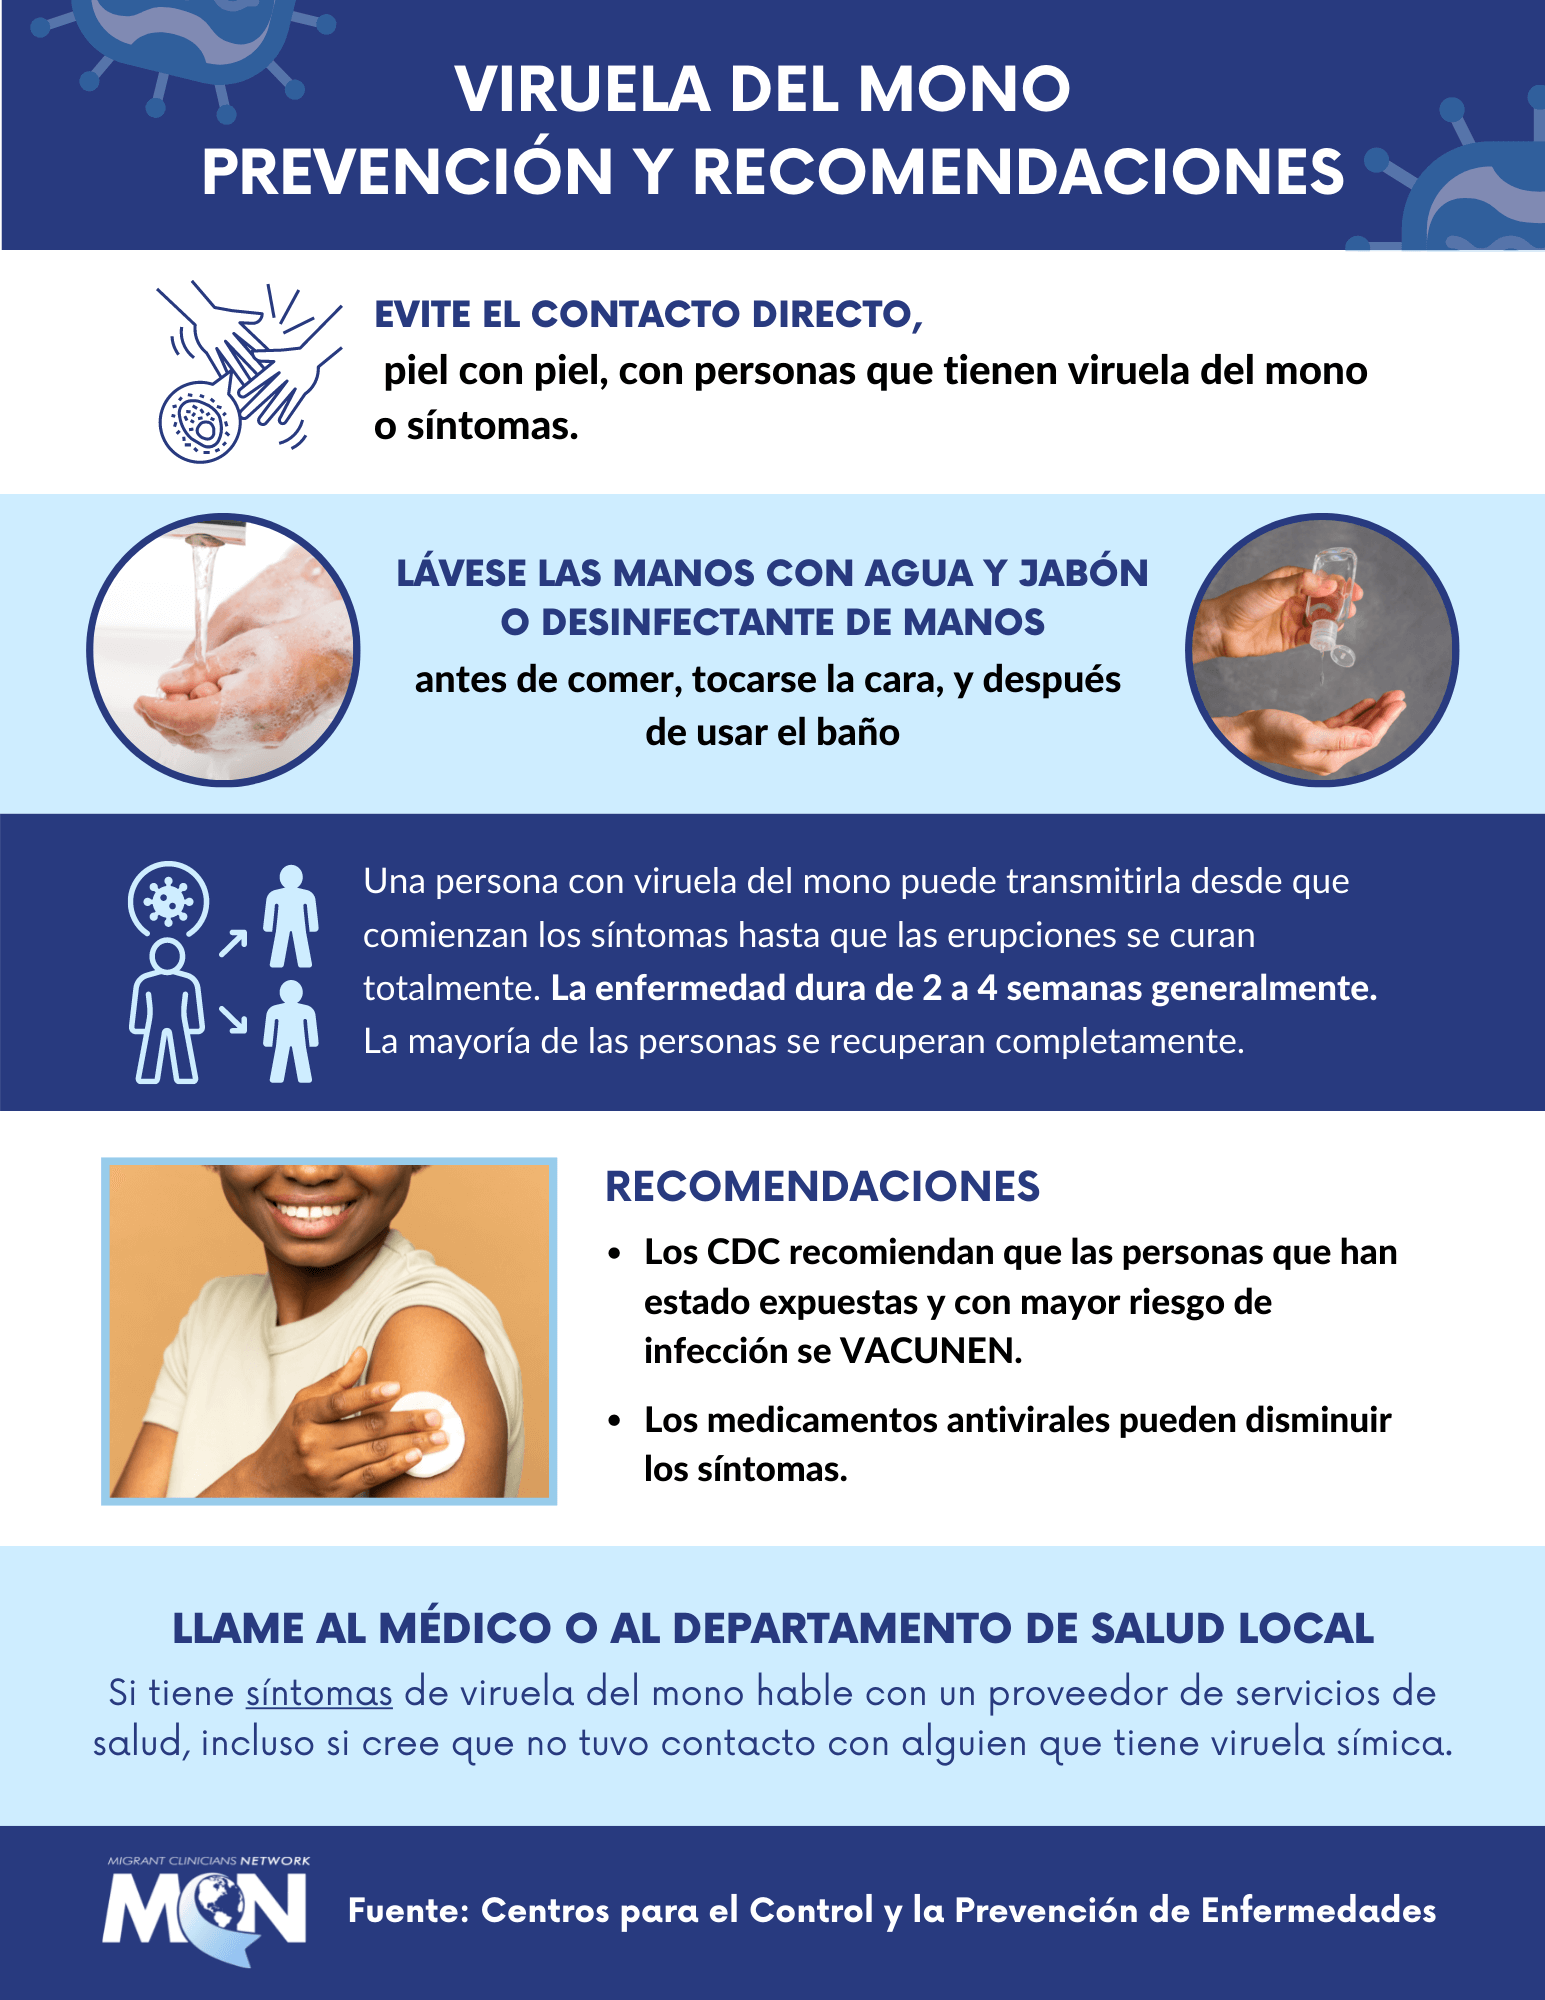 Factsheet in Spanish explaining monkeypox prevention and recommendations with 7 horizontal sections alternating dark blue, white, and light blue backgrounds and images of white hands being washed and using sanitizer. Also an image of black woman holding a piece of gauze to her arm after receiving a vaccine. Migrant Clinicians Network Logo and CDC citation reference is in the bottom section with white text and dark blue background.